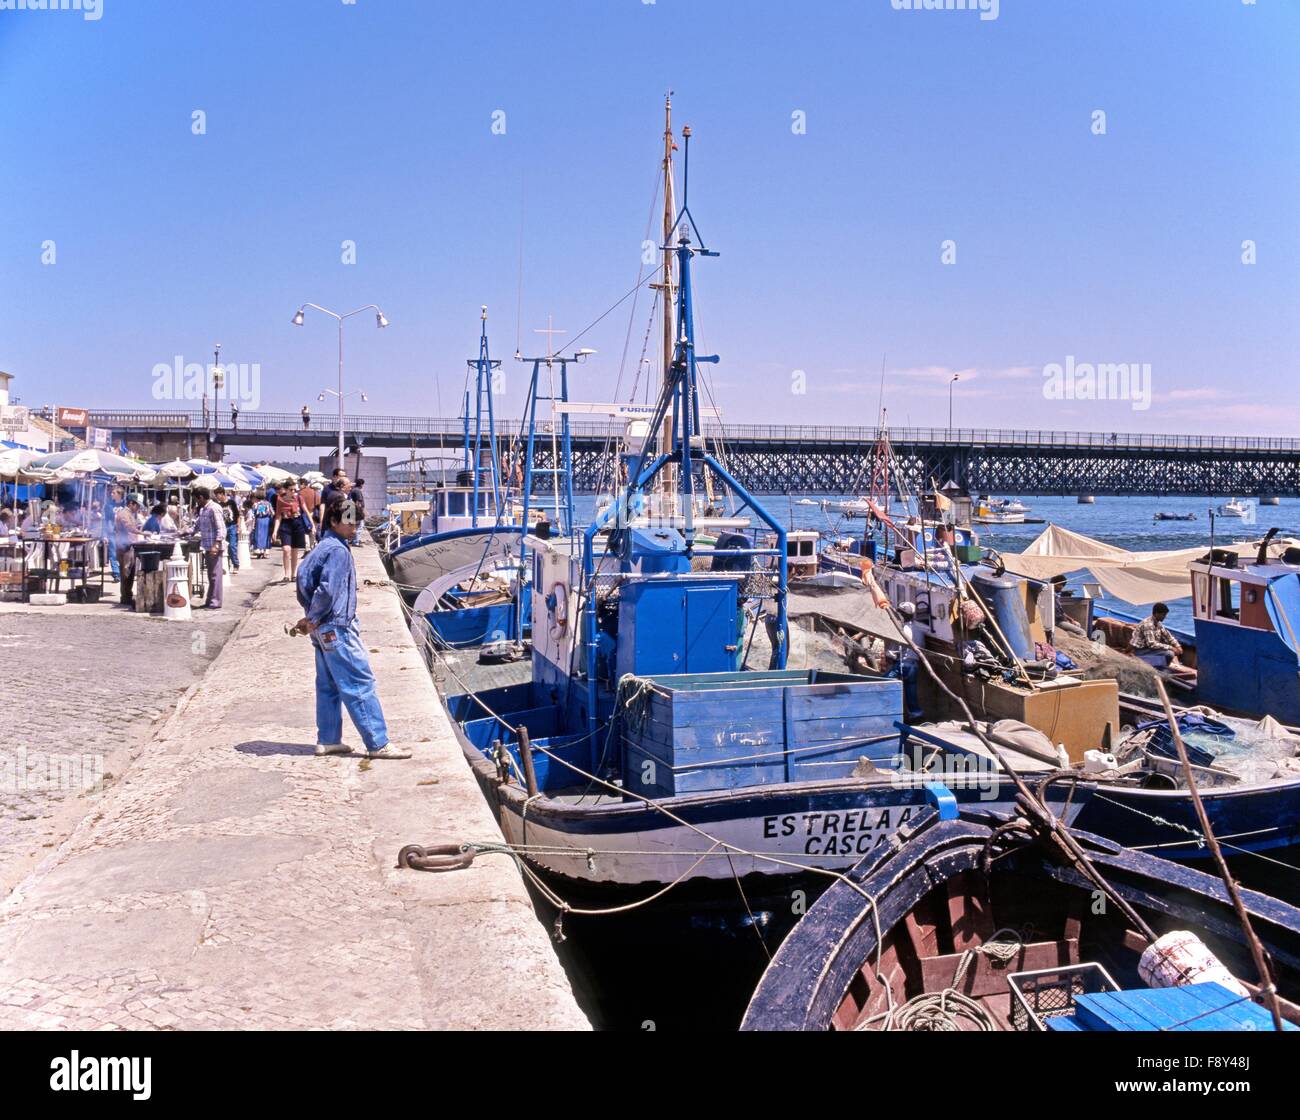 Traditional fishing boats moored along the quayside, Portimao, Algarve, Portugal, Western Europe. Stock Photo